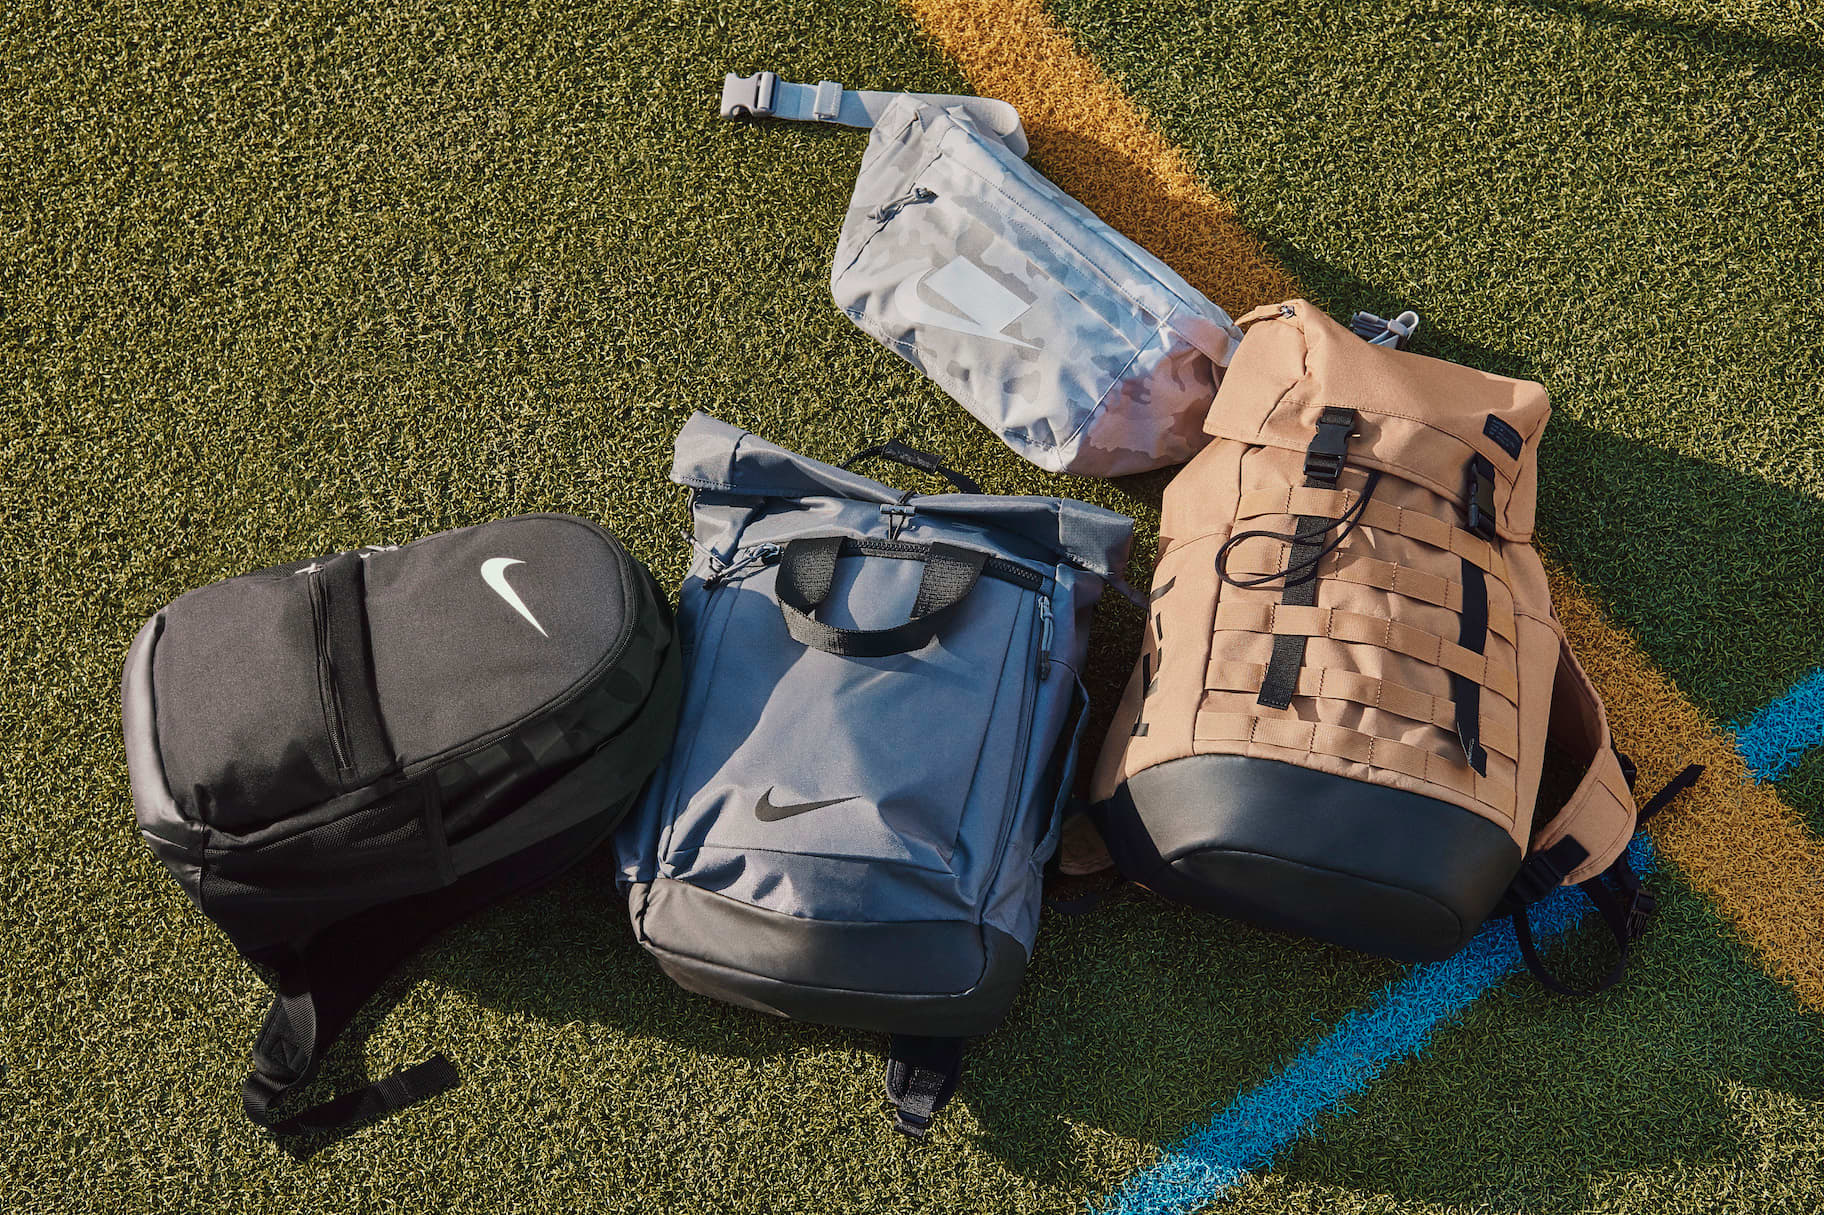 The Best Nike Totes for Gym, Work and Travel. Nike CA